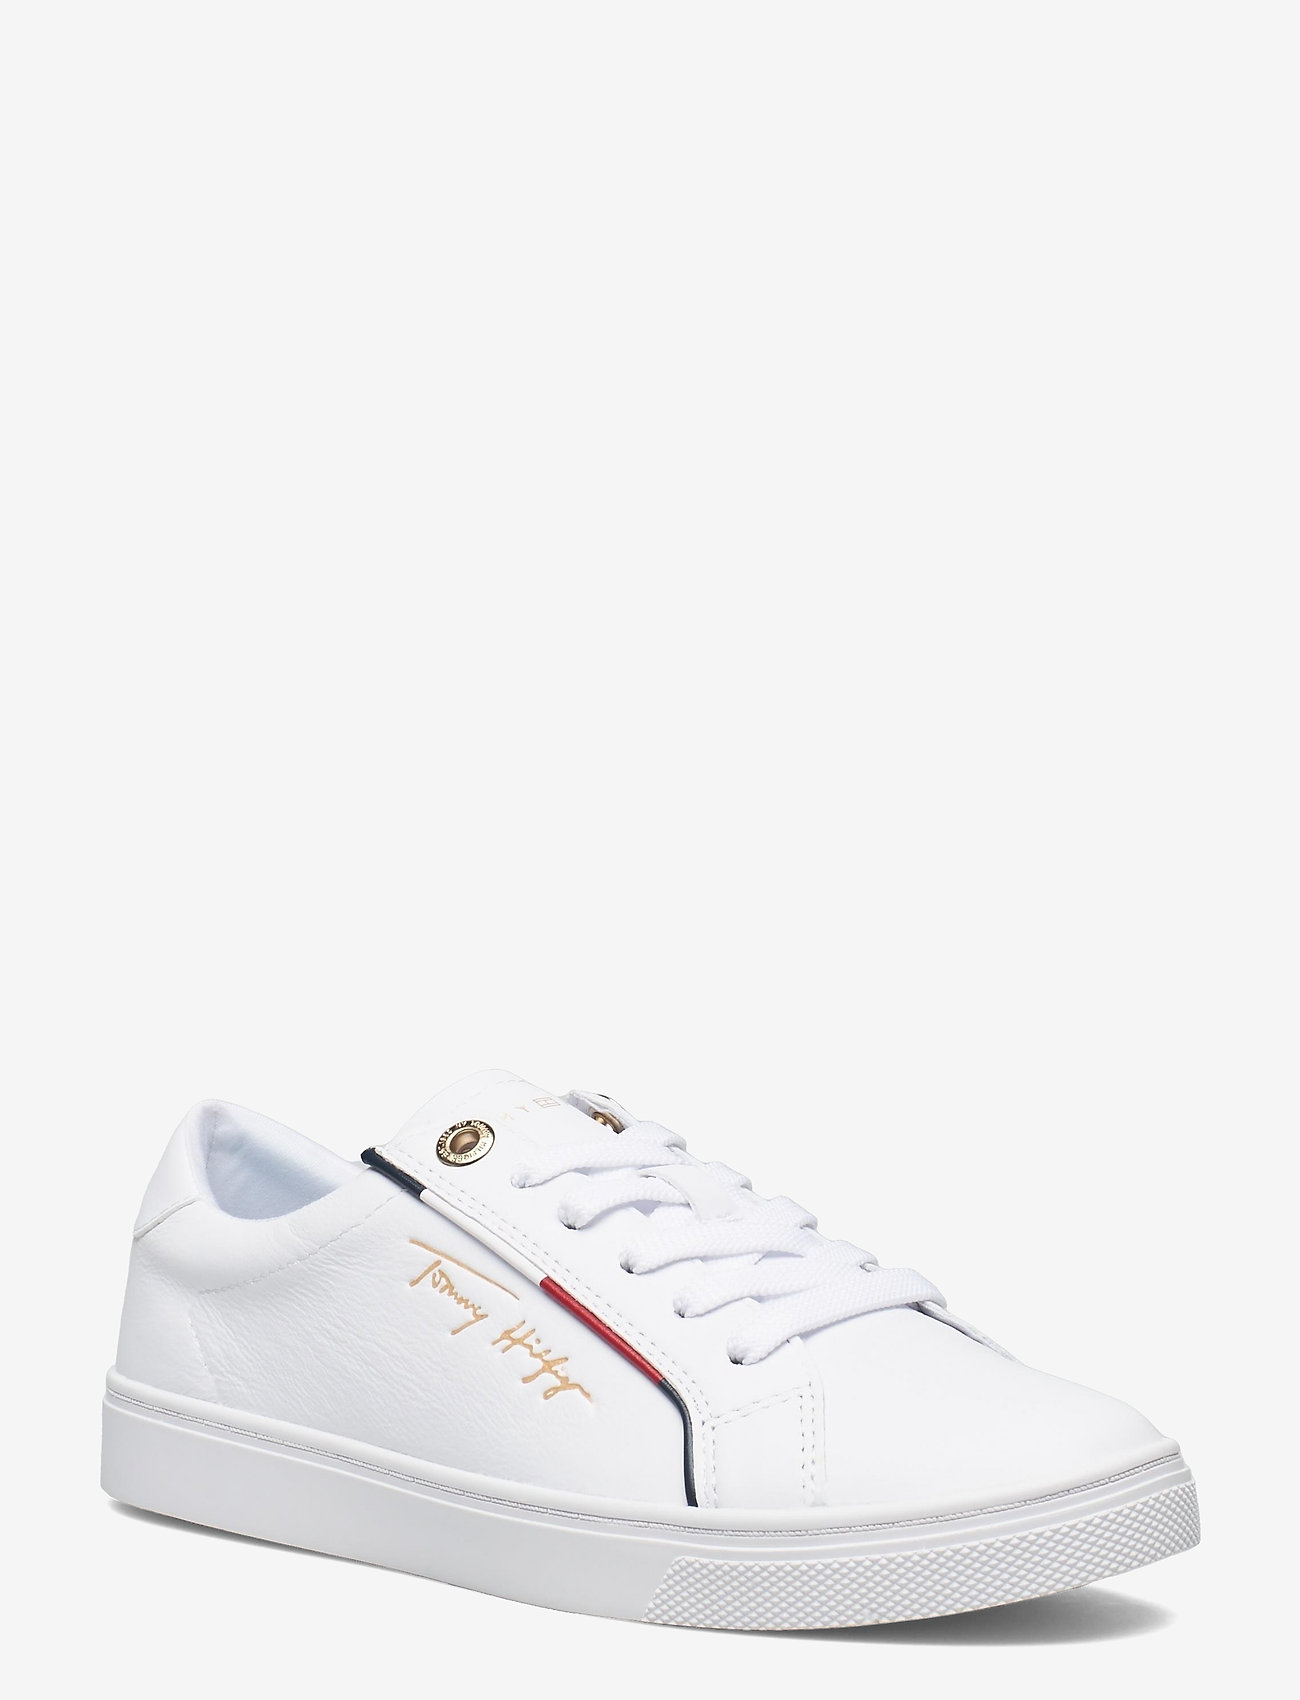 Buy > tommy hilfiger signature shoe > in stock